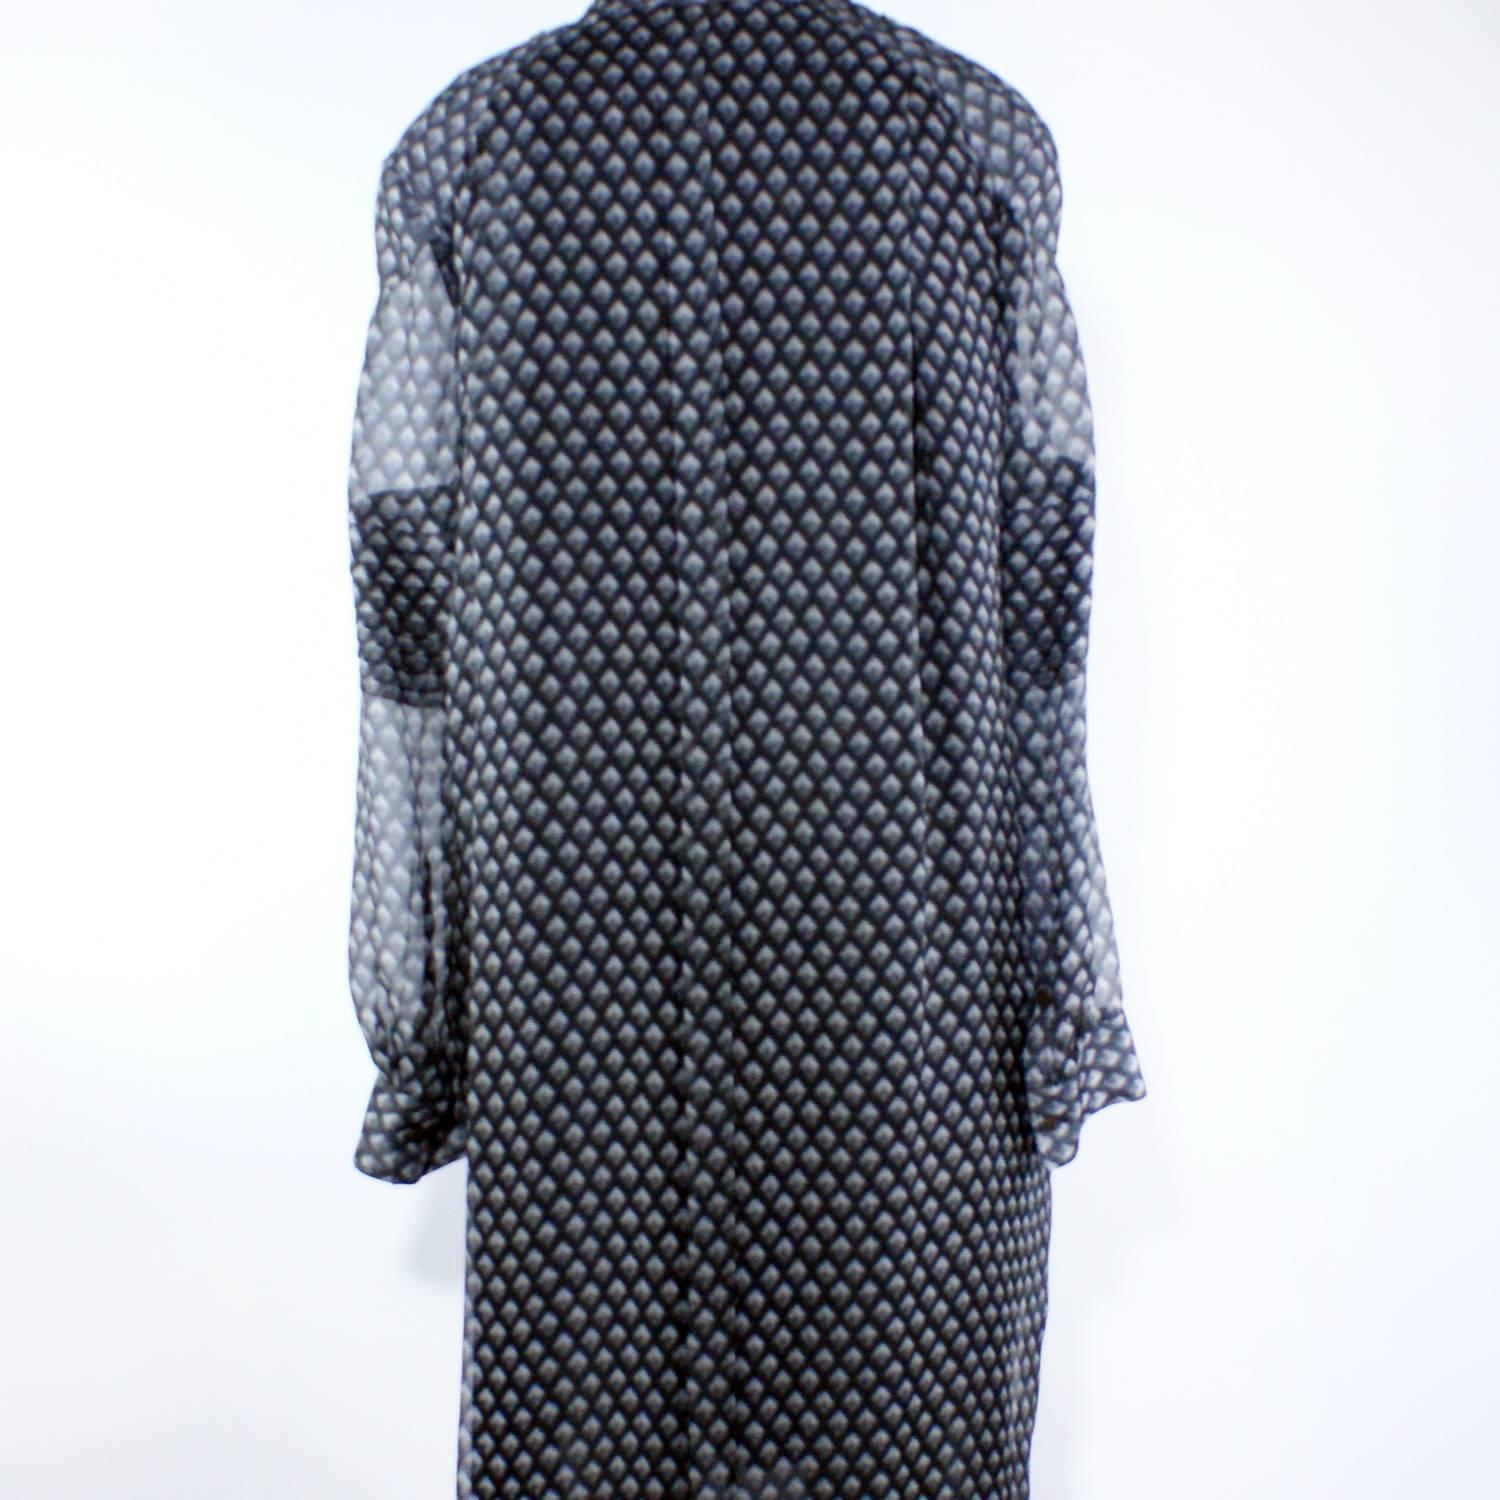 Shift dress design 
Grey print pattern
Buttons at the collar 
Size 36